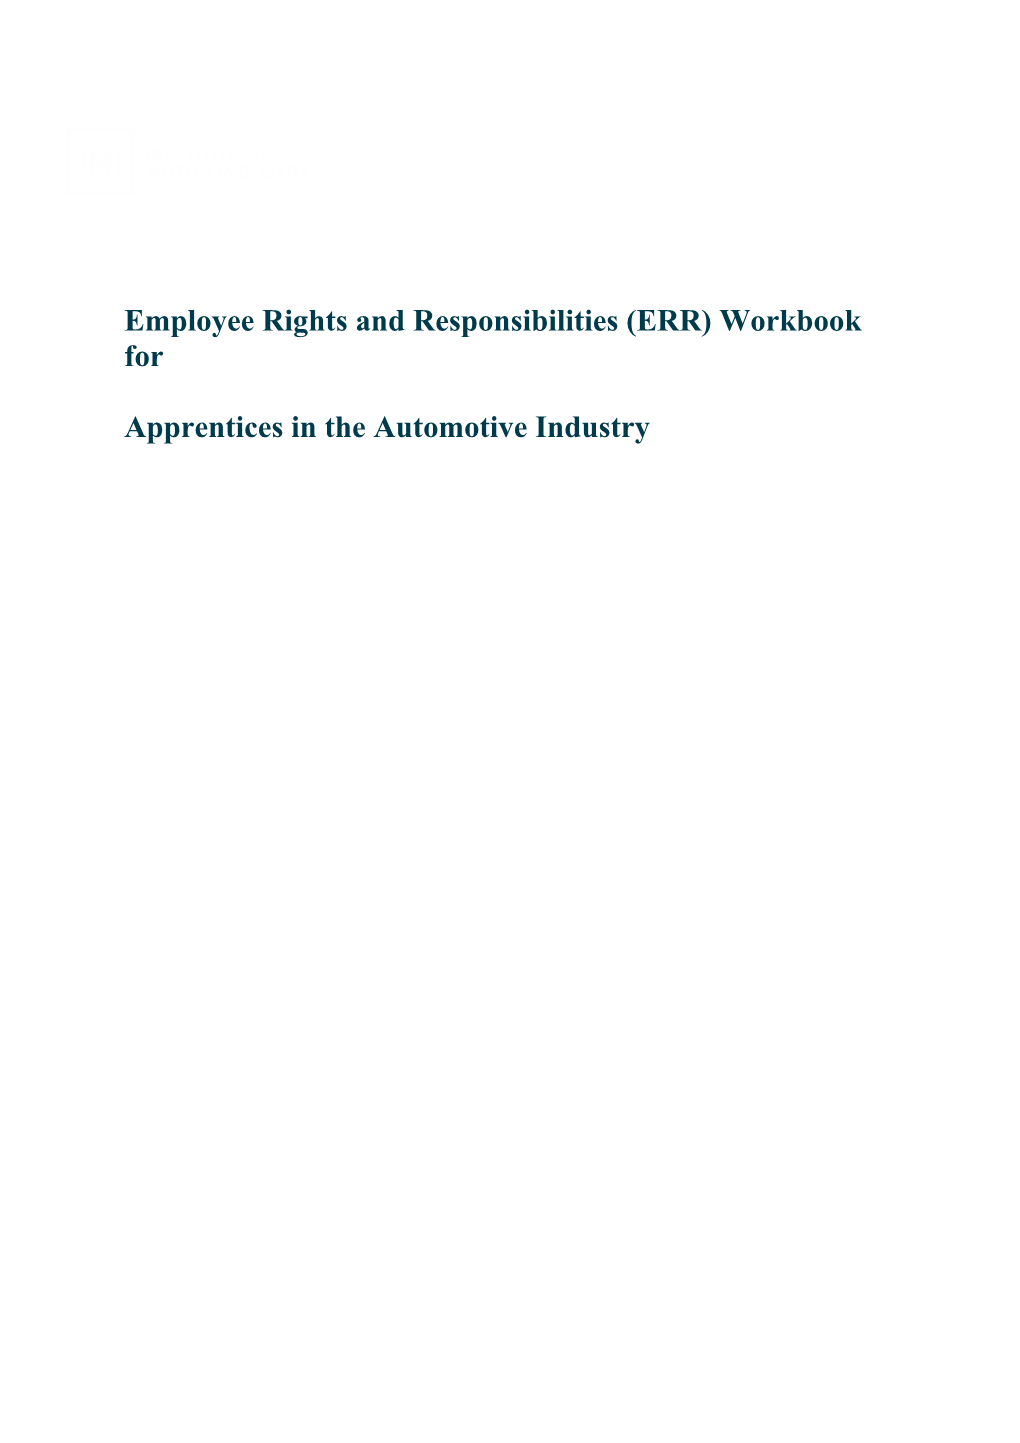 Employee Rights and Responsibilities (ERR) Workbook For